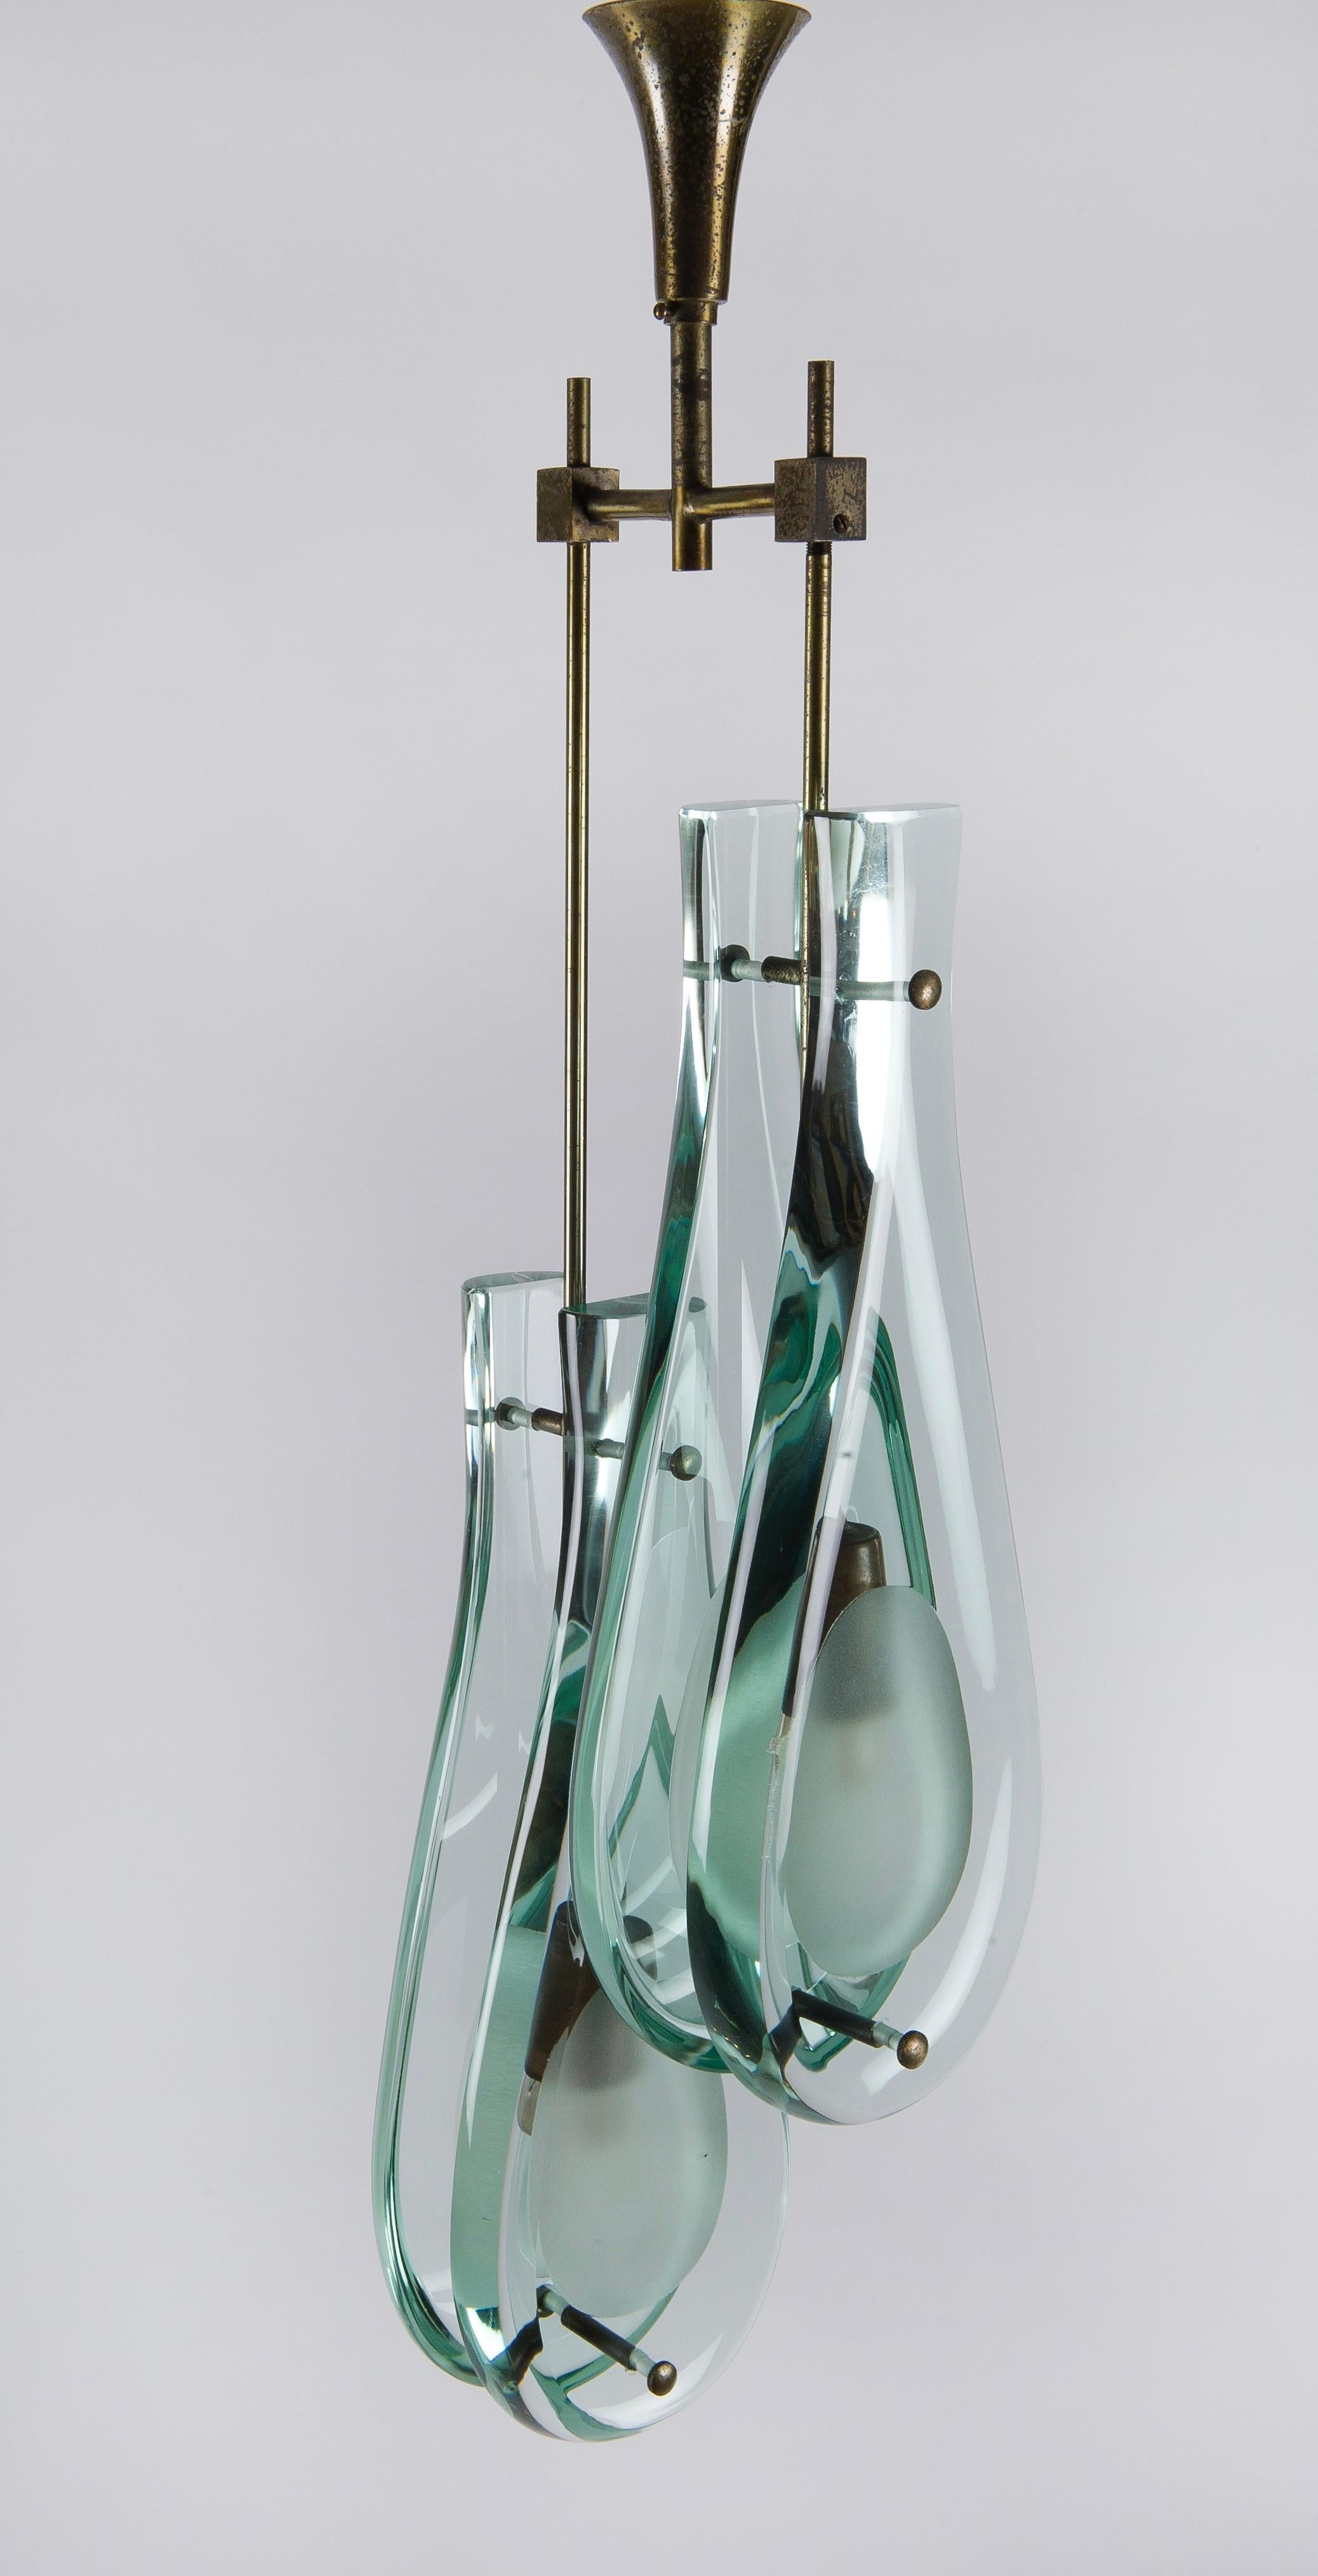 A rare '2259/2' model ceiling pendant designed by Max Ingrand for the prestigious Italian glass manufacturer, Fontana Arte, c.1960. This beautiful ceiling light consists of a double pair of thick cut 'teardrop' shaped glass diffusers, each with an